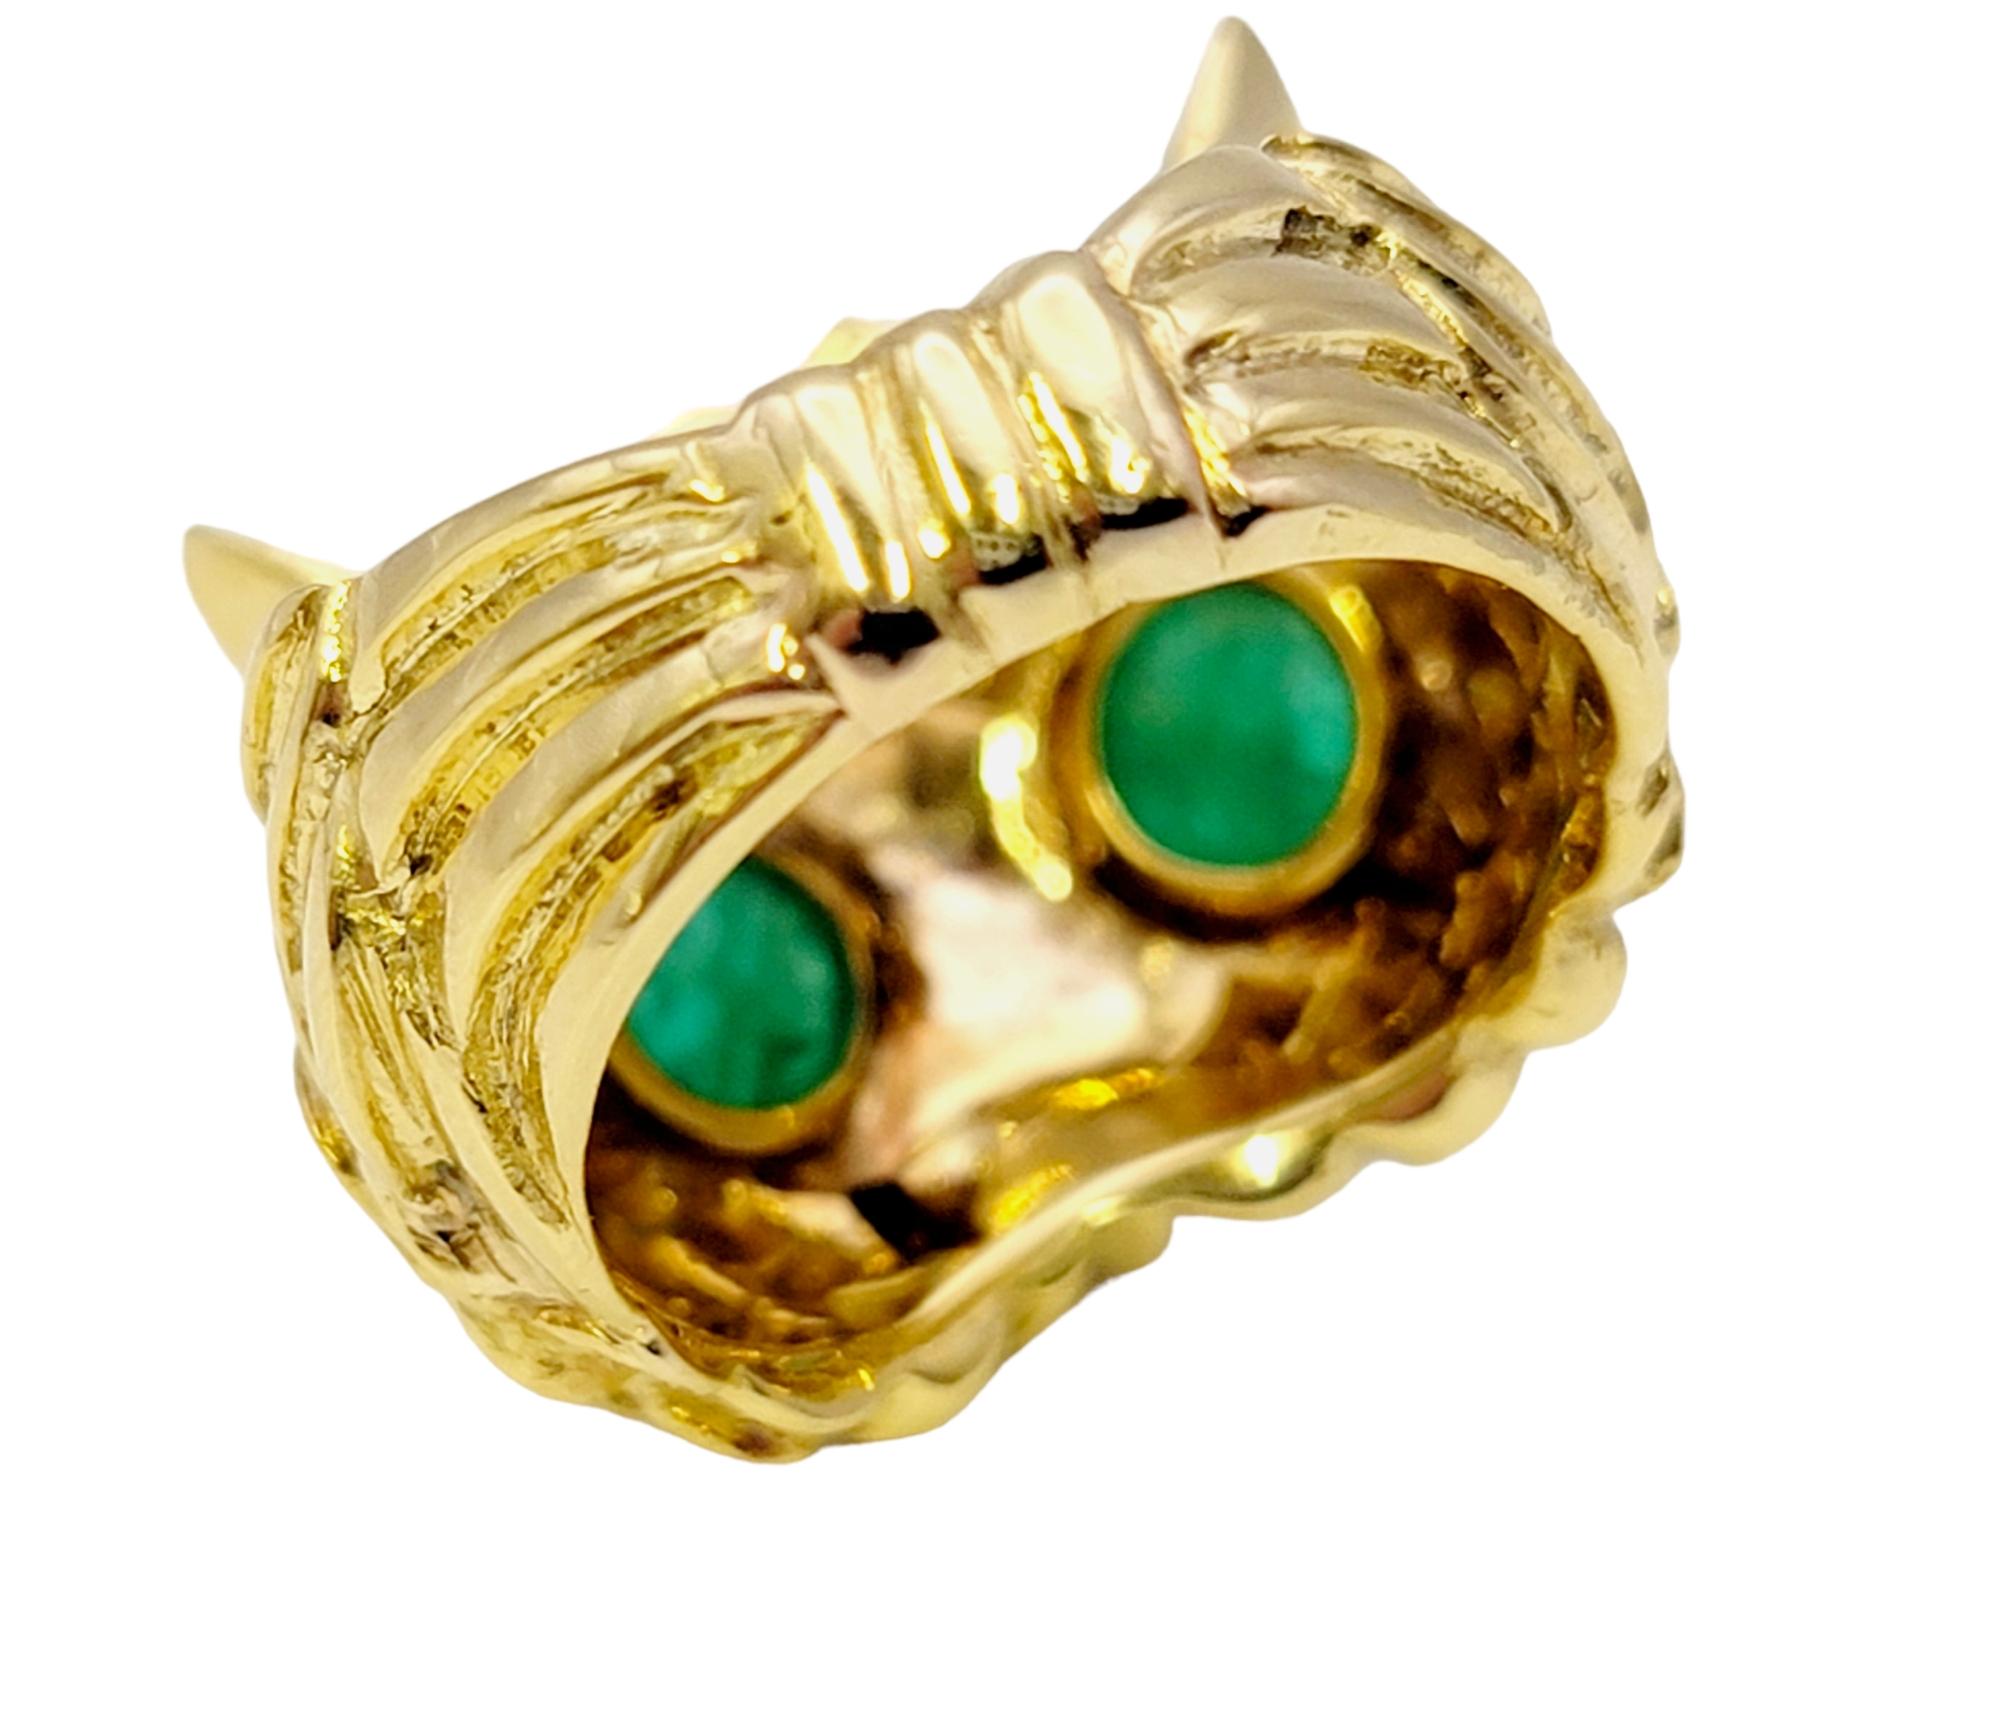 Diamond Embellished Owl Ring with Cabochon Emerald Eyes in 14 Karat Yellow Gold For Sale 3